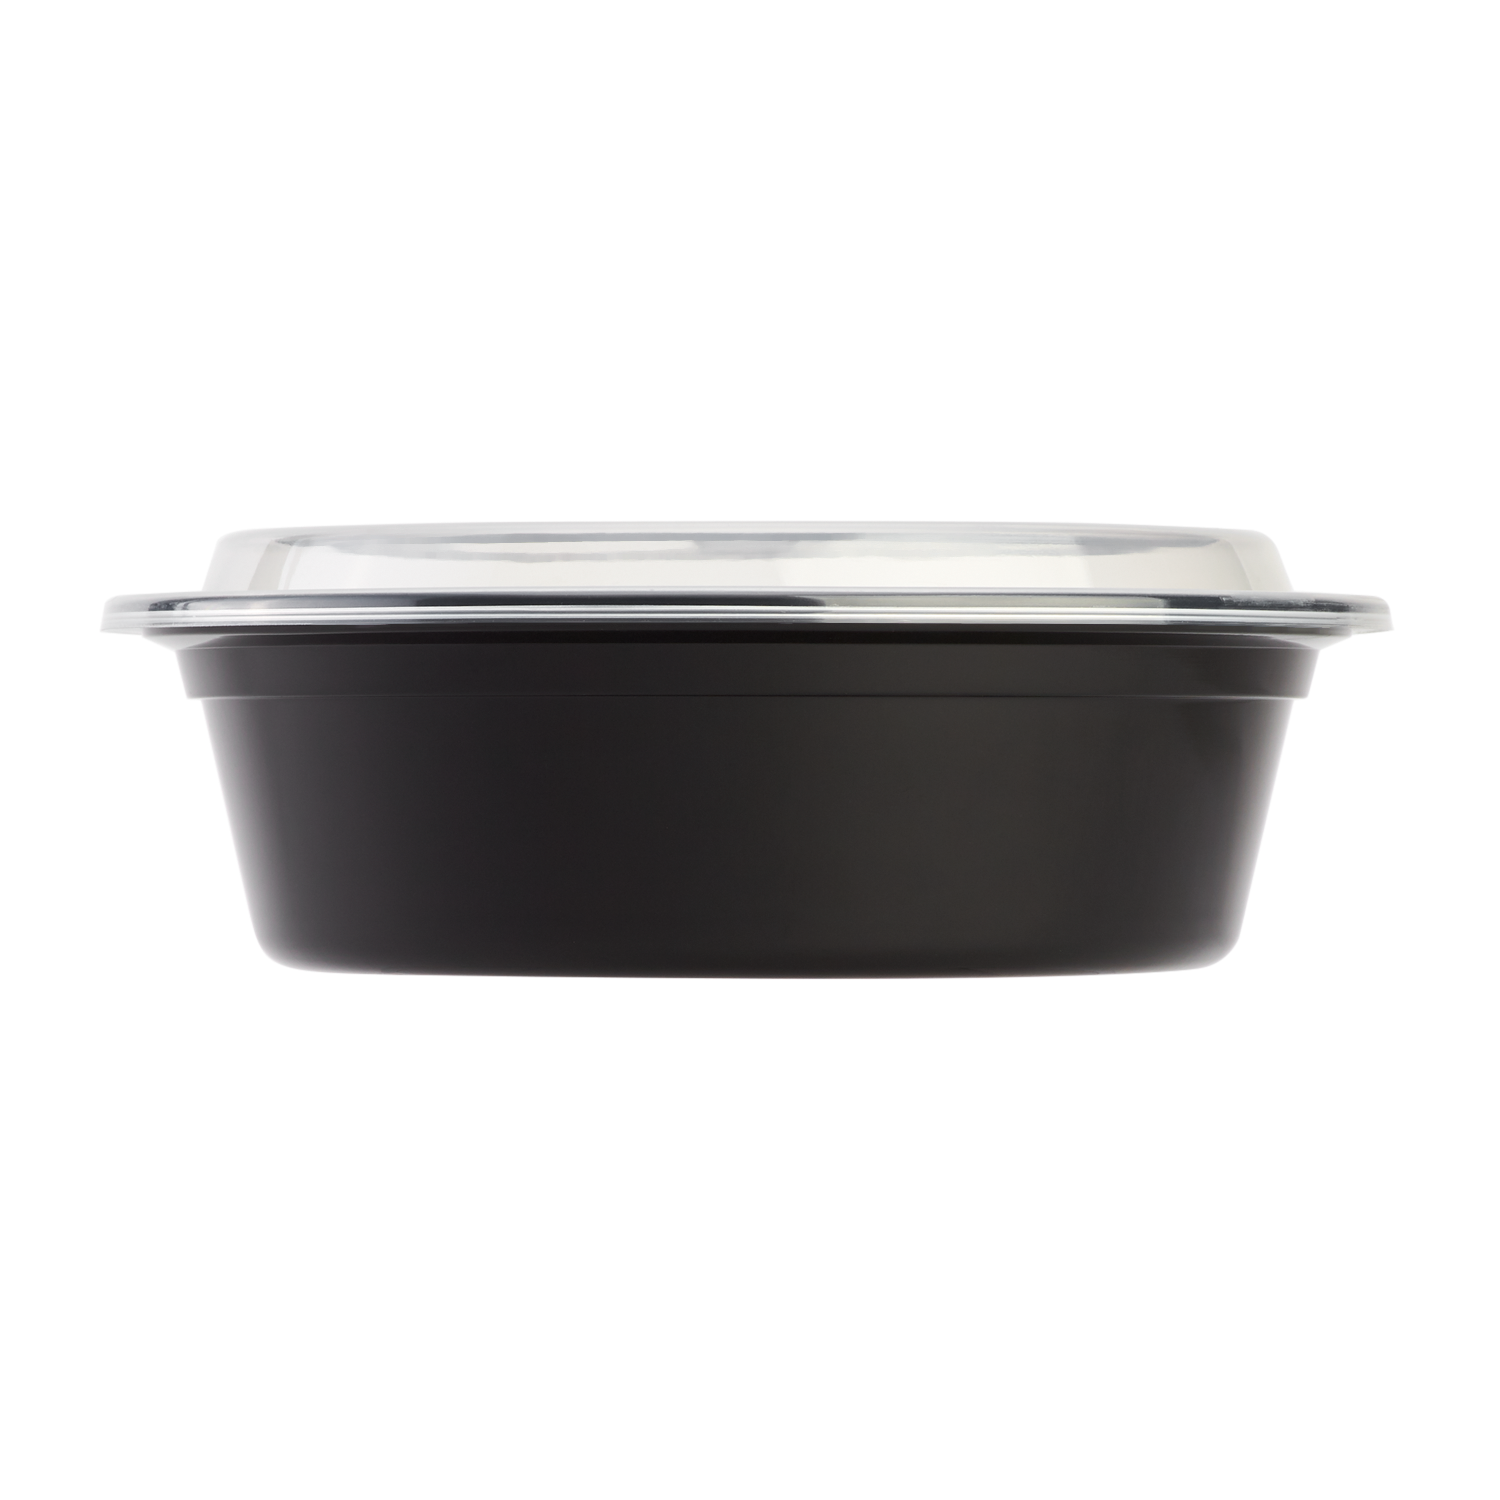 [25 Count] 32 oz Black Plastic Meal Prep Containers with Lids - Round Food Storage Container Microwave Safe - BPA-Free, Stackable, Reusable